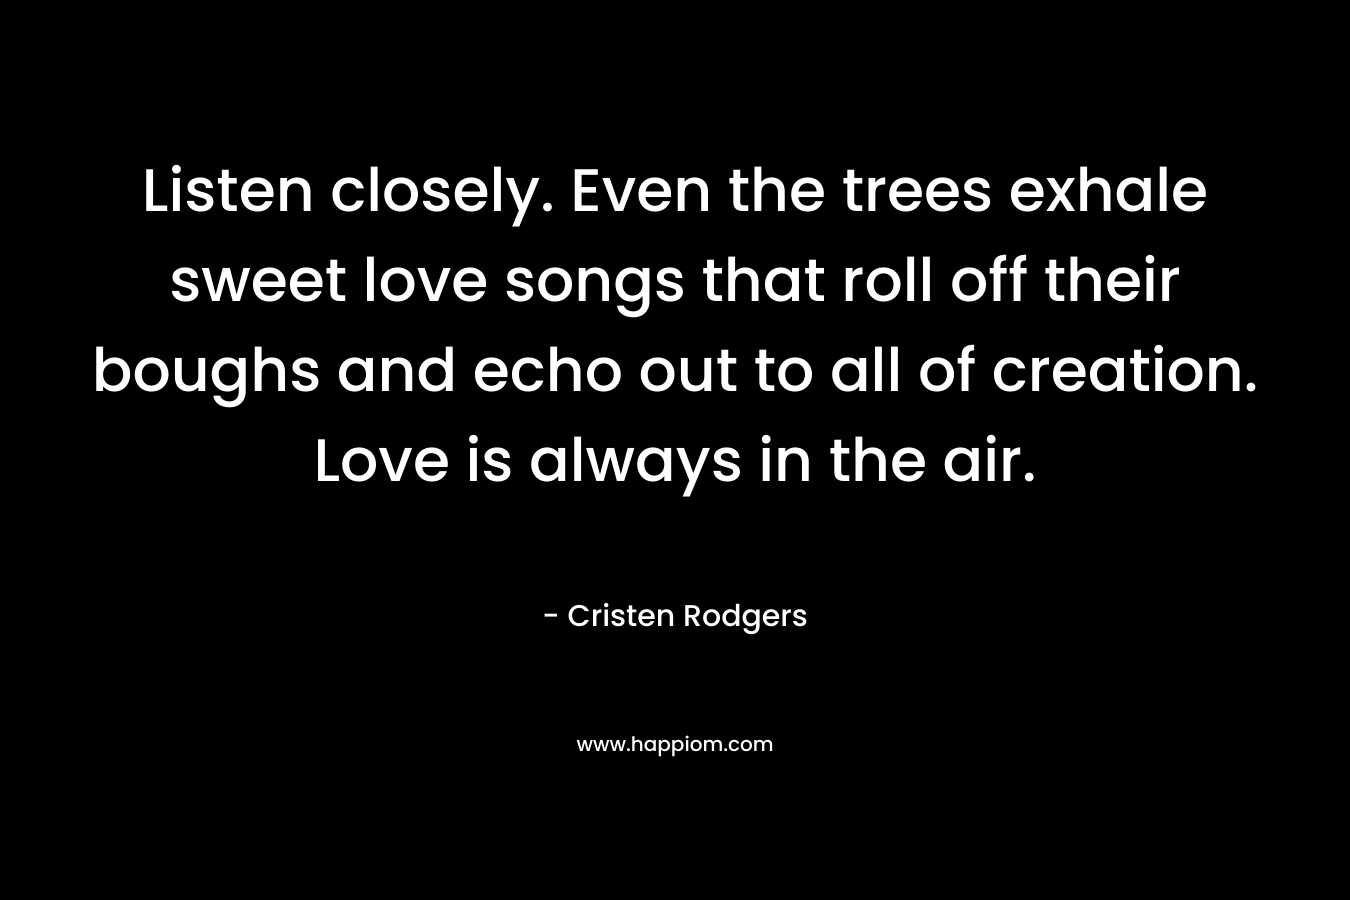 Listen closely. Even the trees exhale sweet love songs that roll off their boughs and echo out to all of creation. Love is always in the air. – Cristen Rodgers